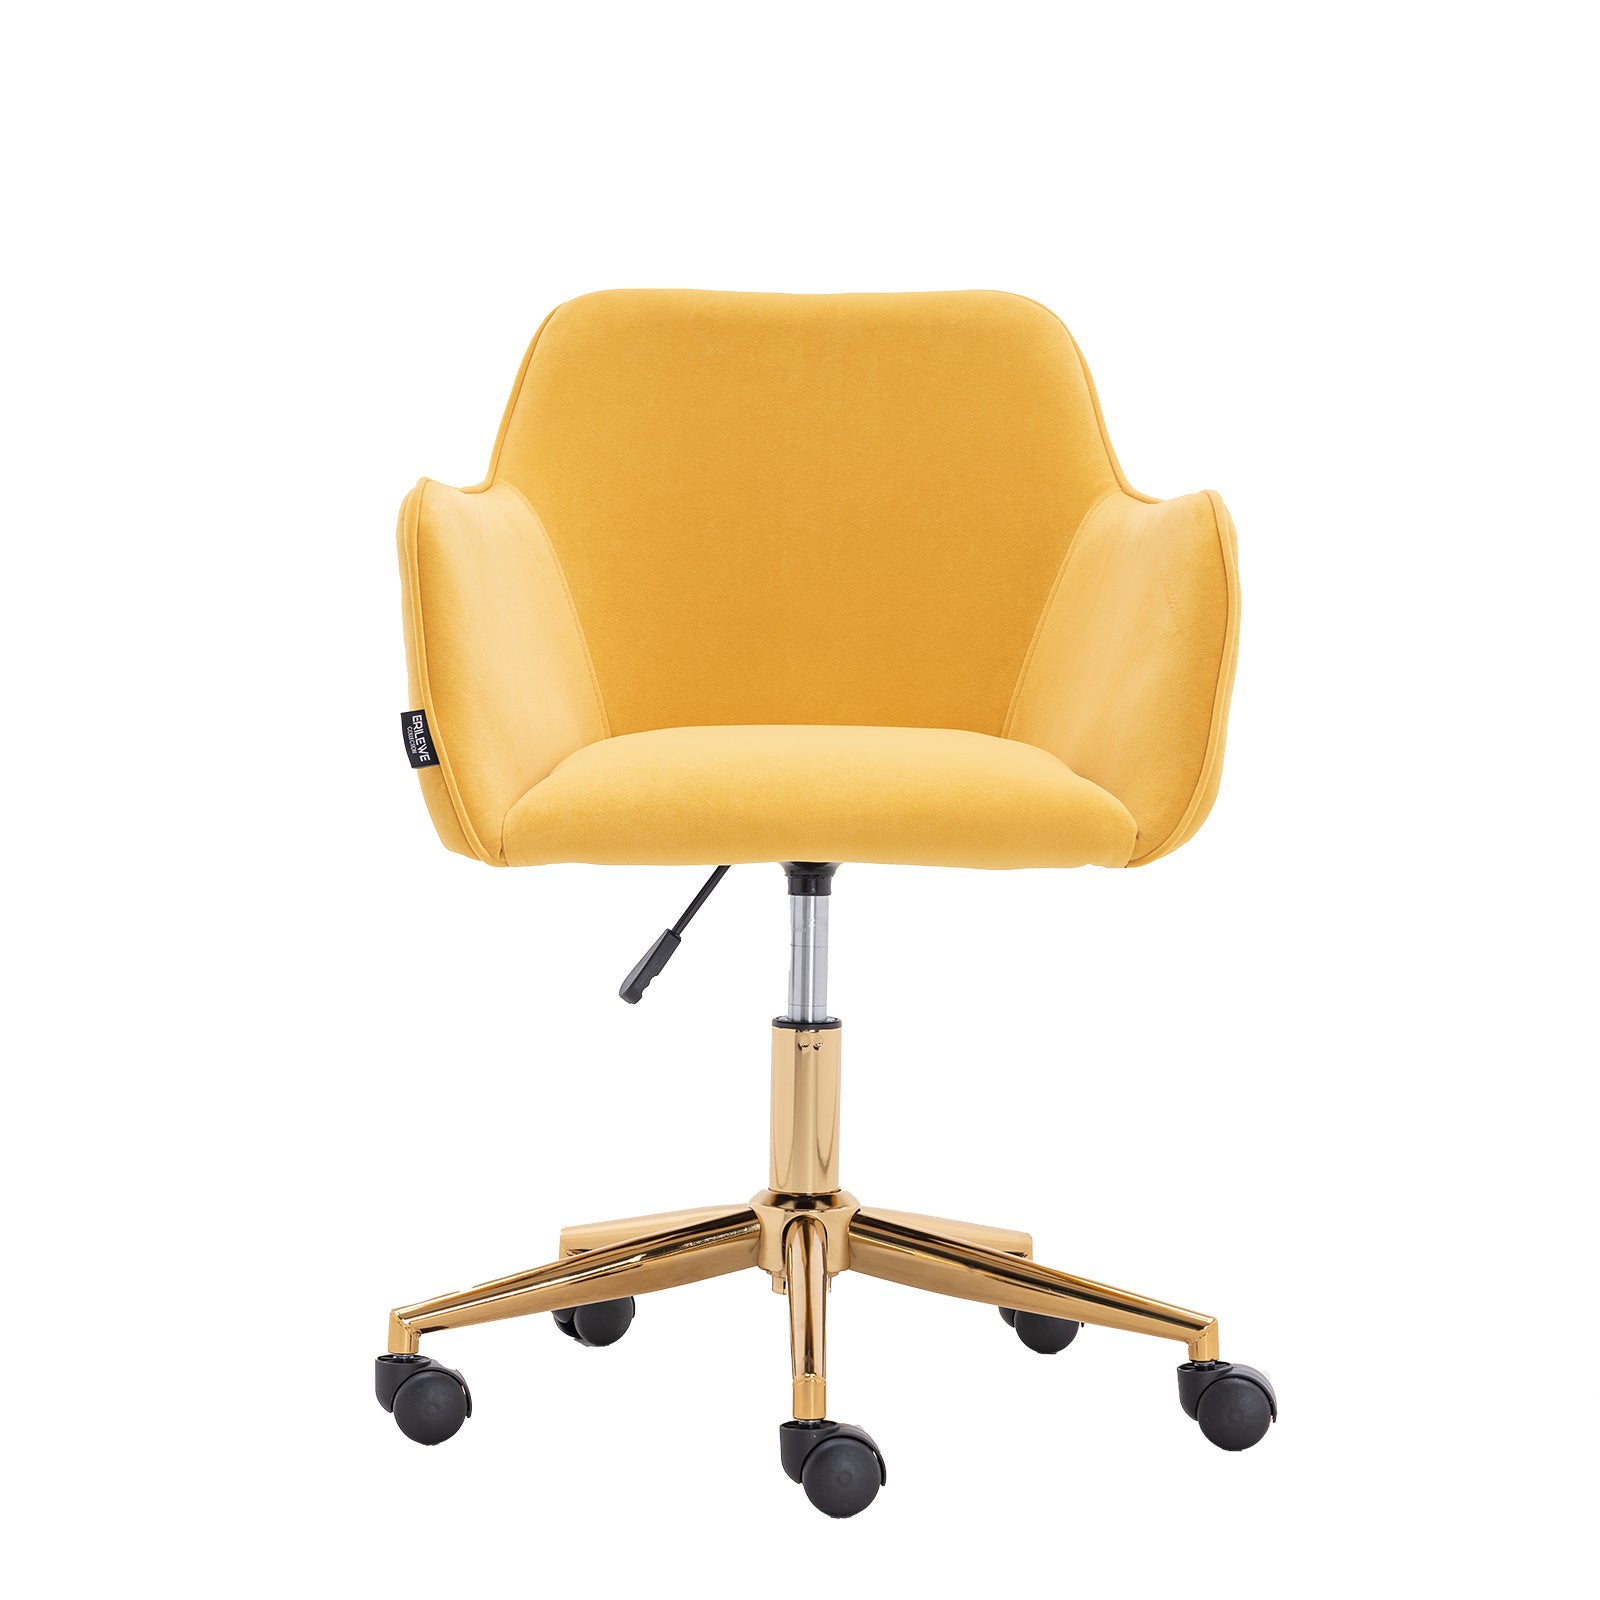 Modern Velvet Fabric Material Adjustable Height 360 Revolving Home Office Chair With Gold Metal Legs And Universal Wheels For Indoor; Yellow